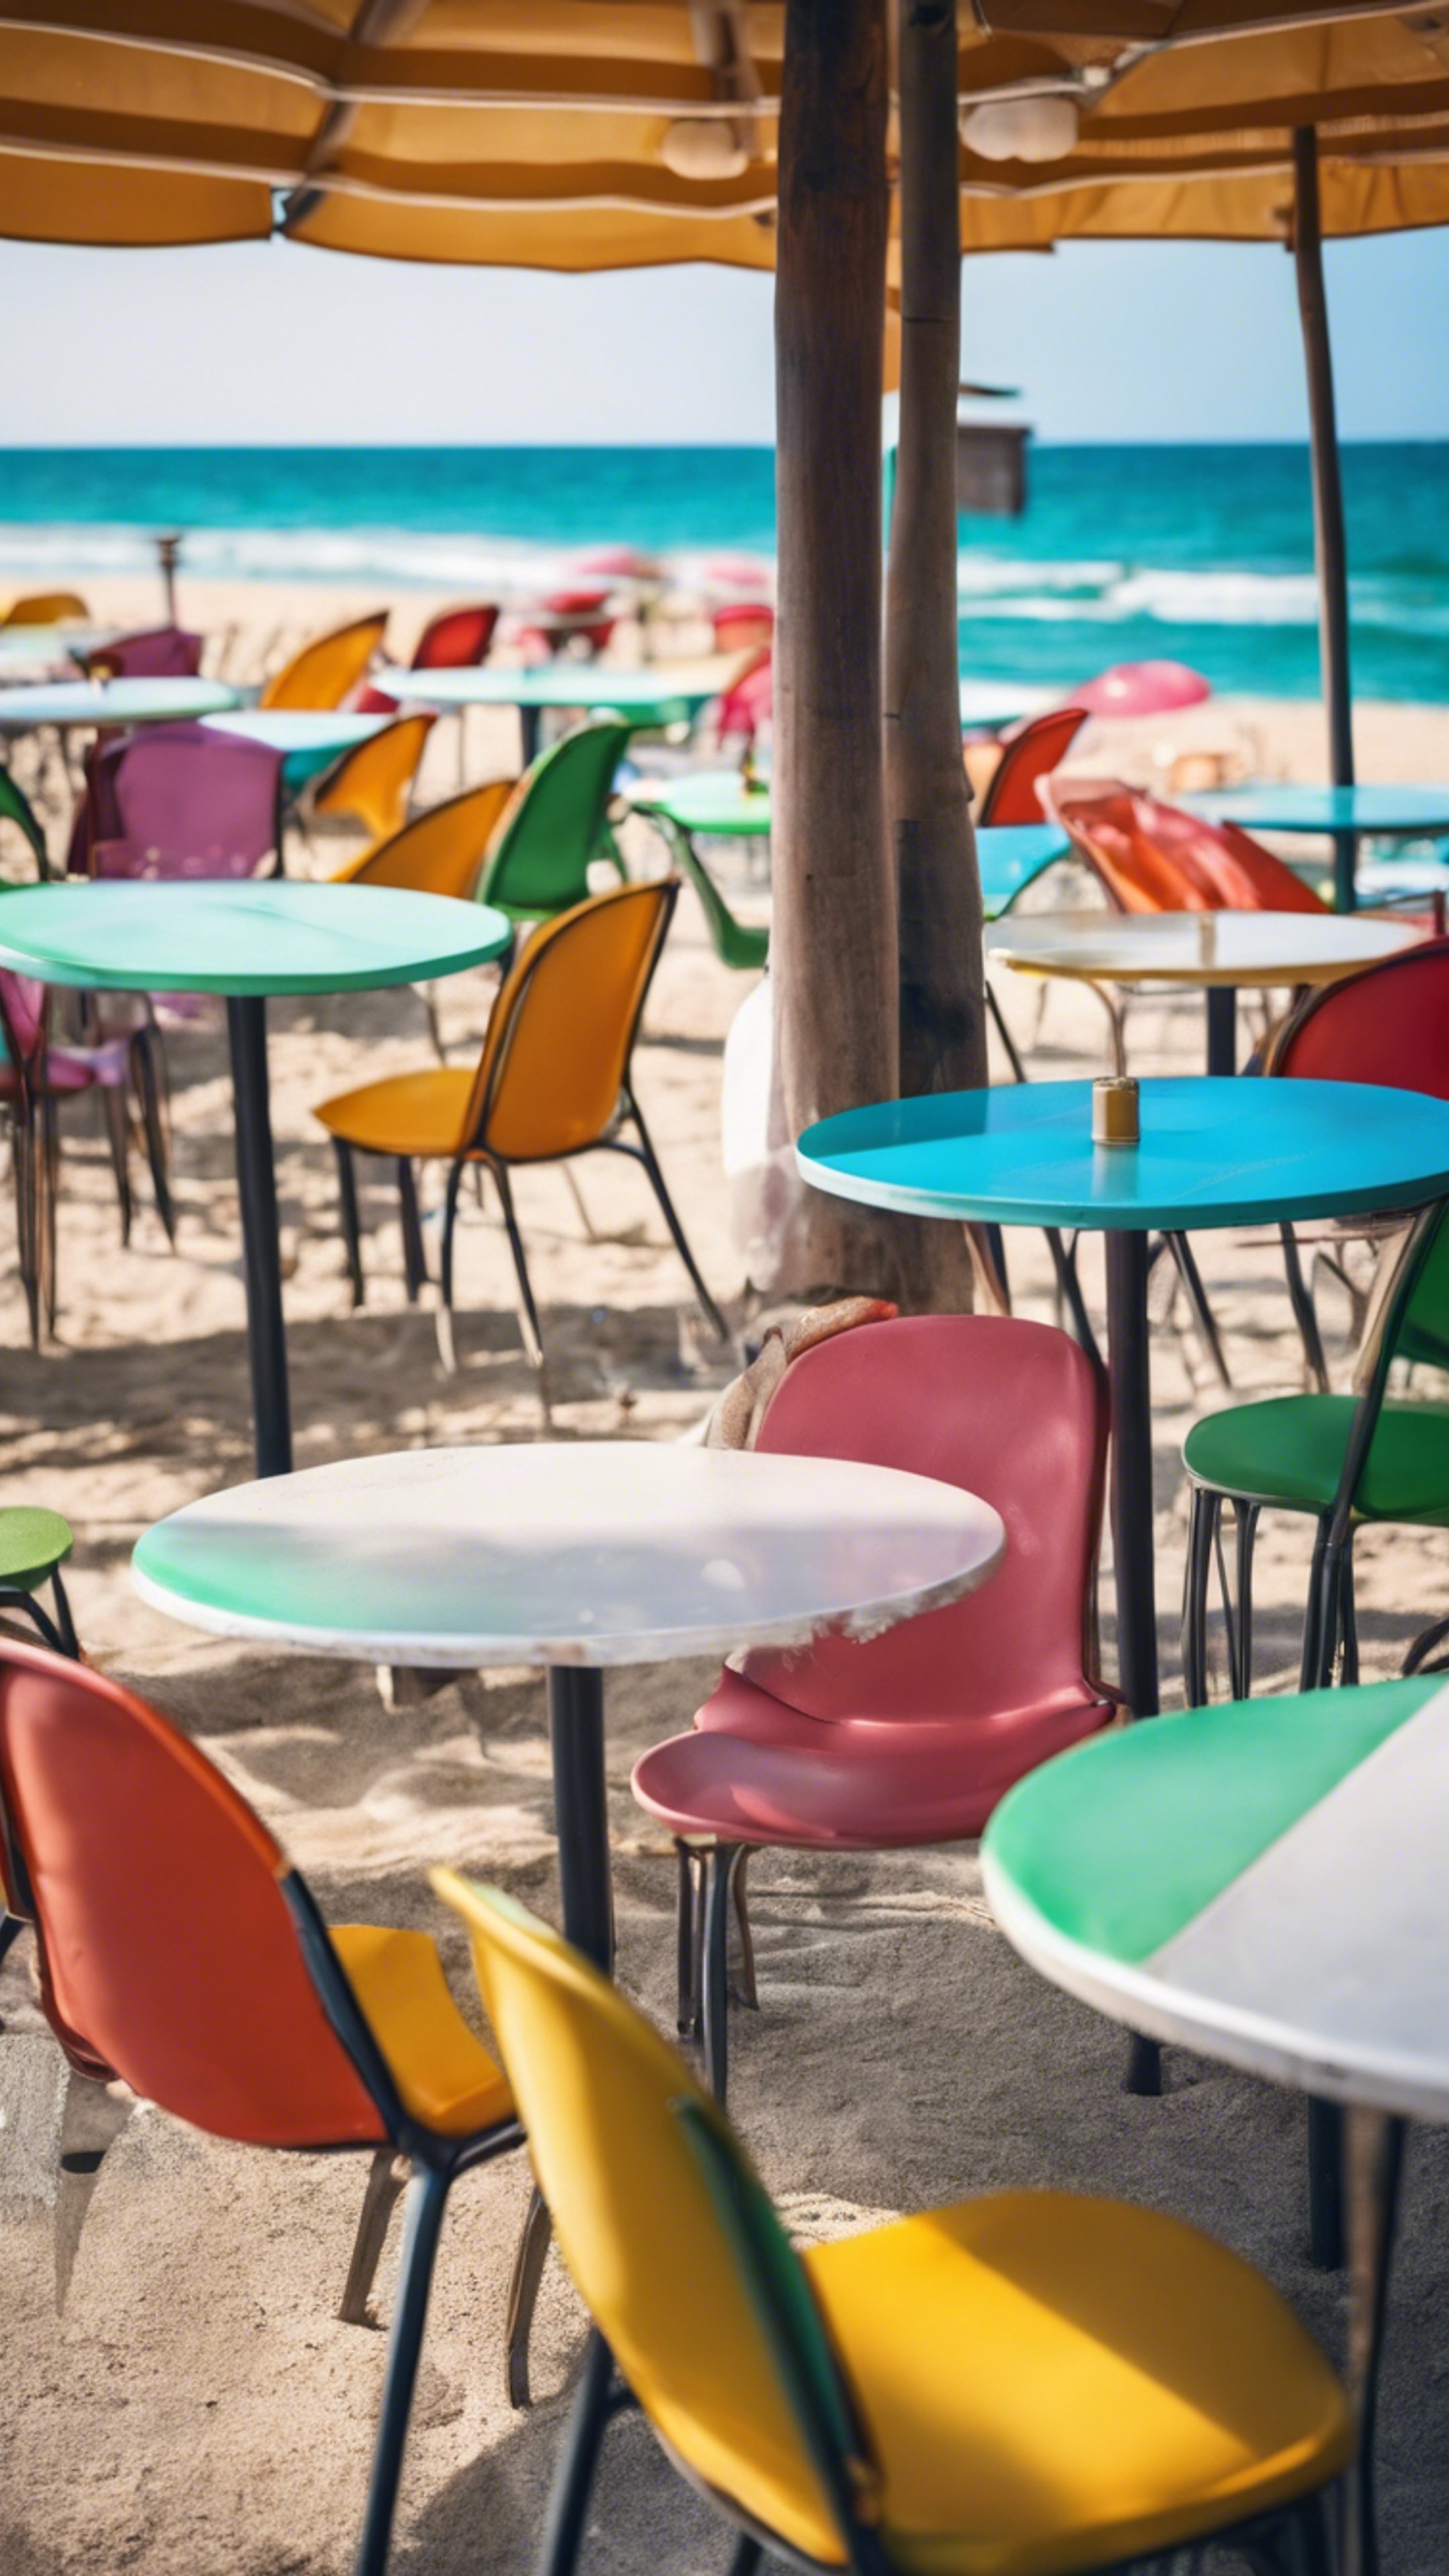 A beach side cafe with colorful chairs, umbrellas, and a panoramic view of the ocean. טפט[e8a344cbd52d49a3867e]